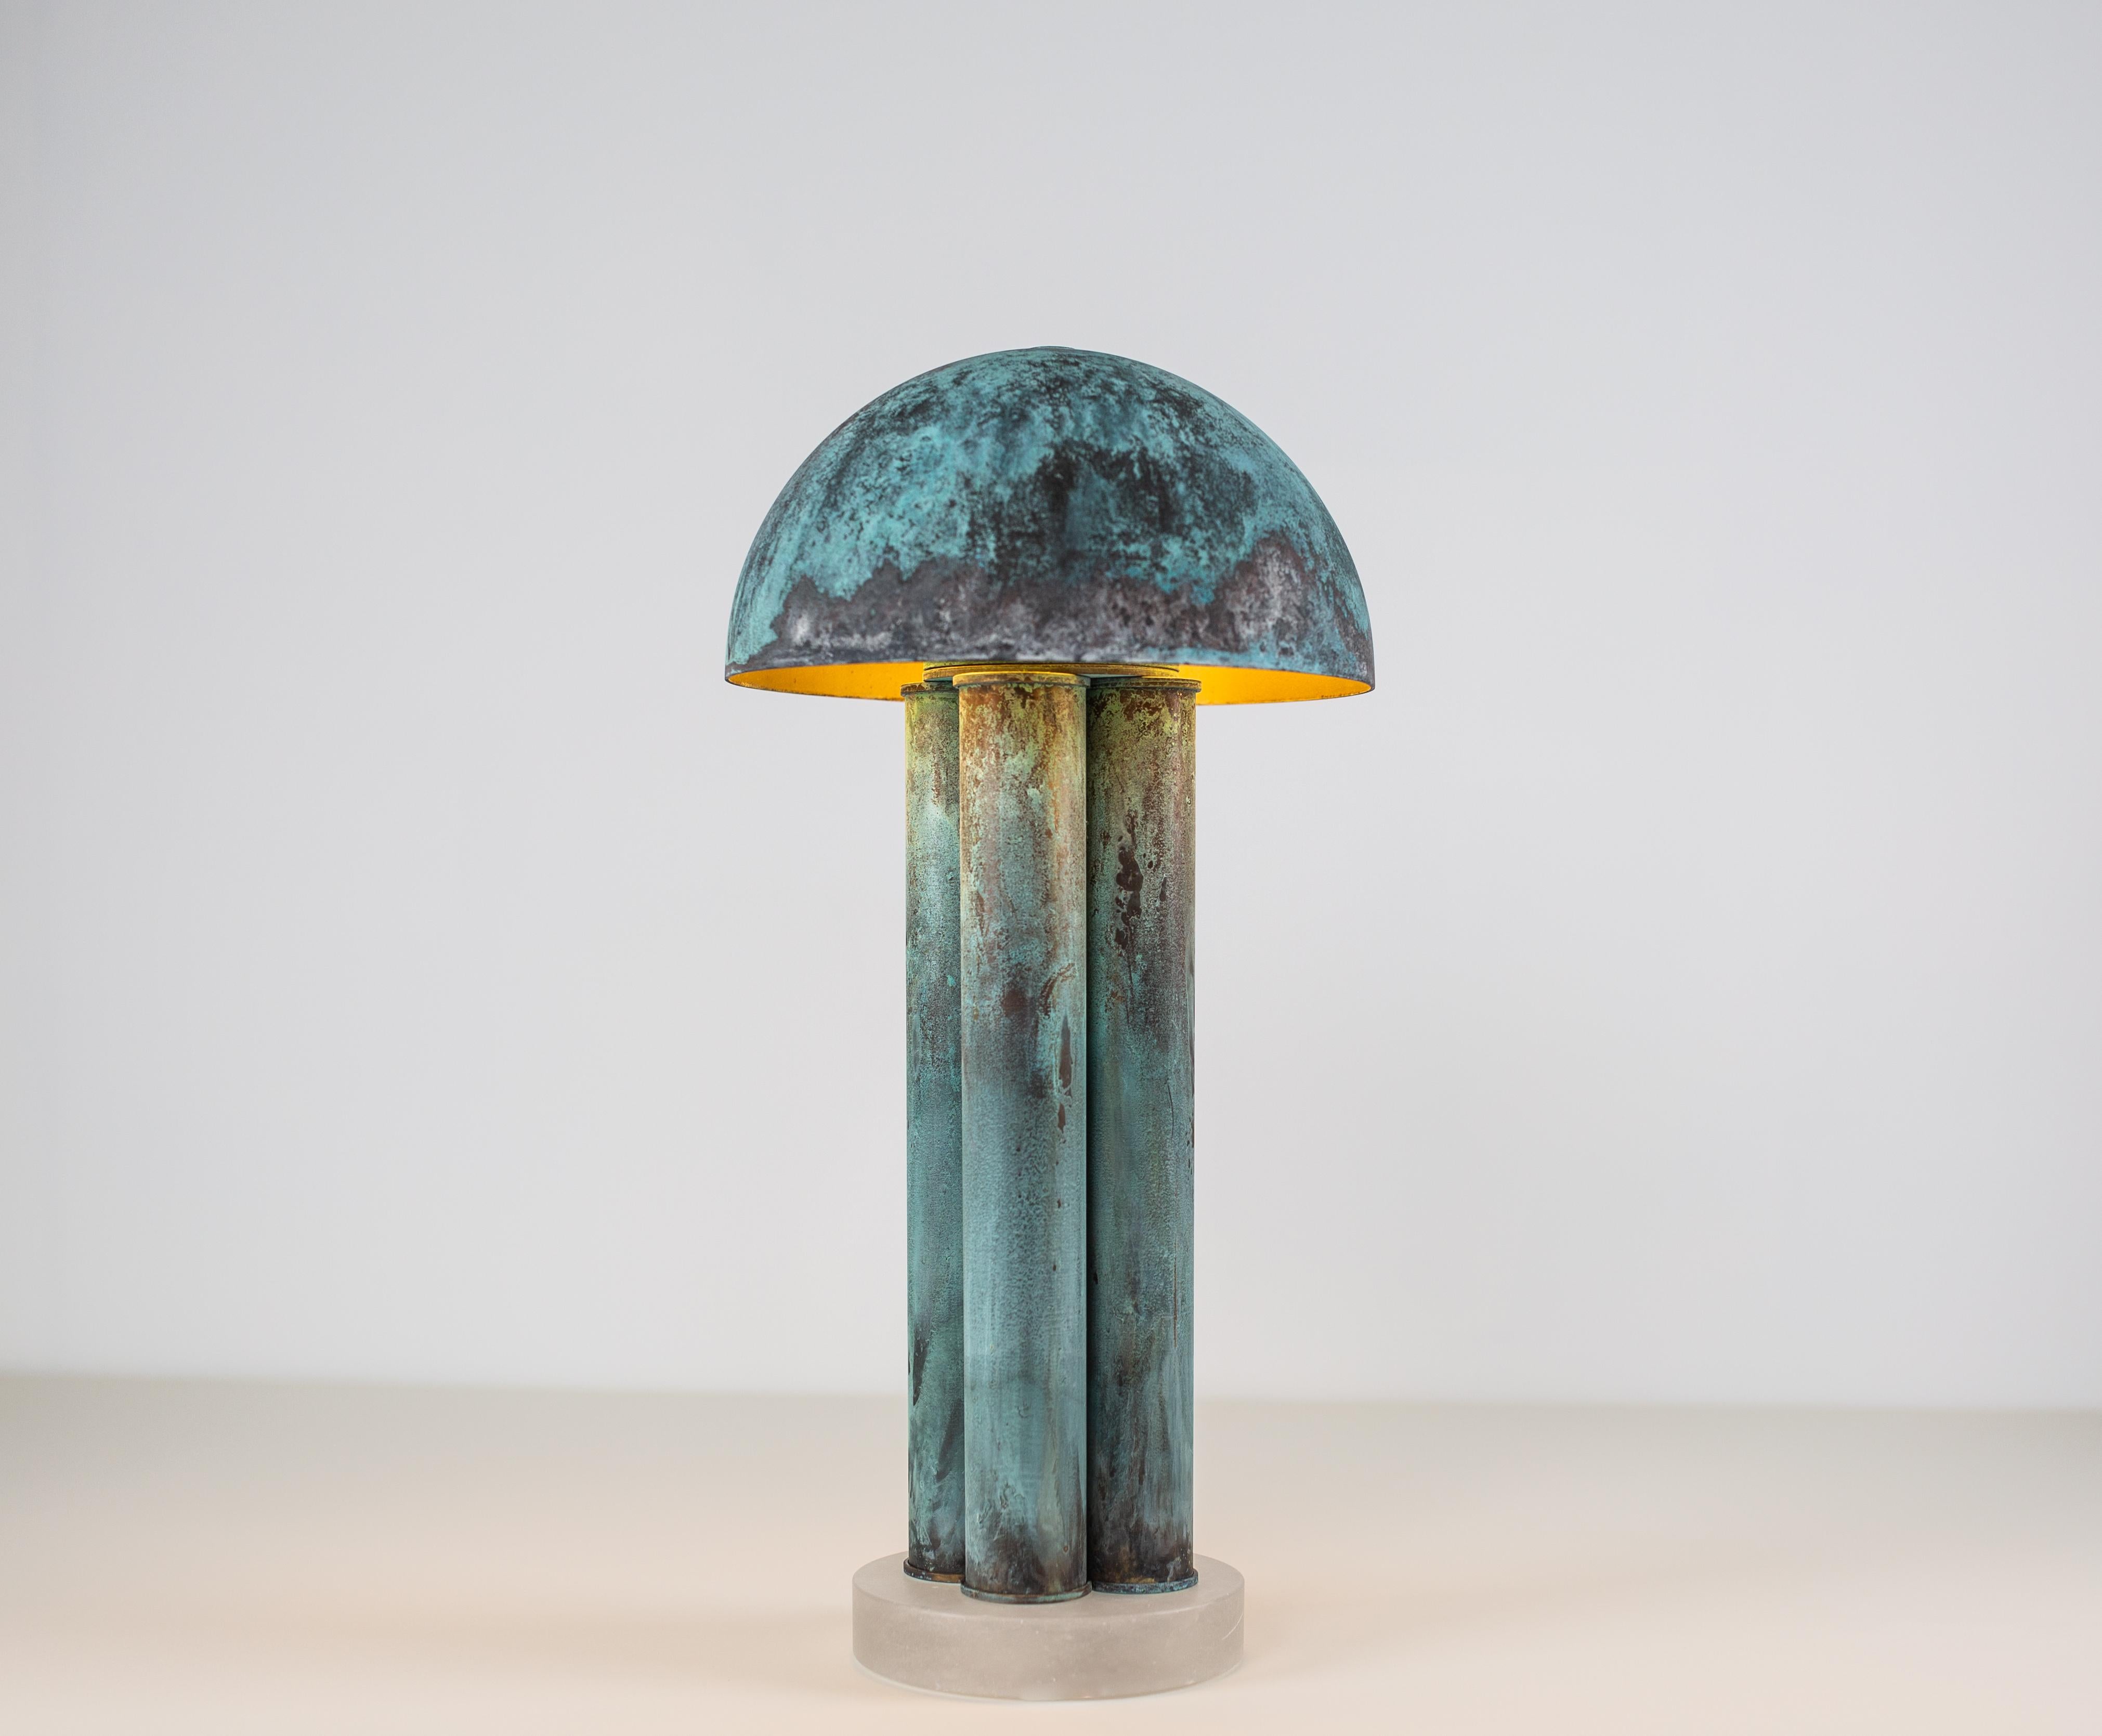 BAR is a table lamp by Kalin Asenov. Alabaster base, verdigris patina, and column, supporting a brass dome. 

Every piece is made to order which allows us to create variations in dimensions and finish as specified by the customer. 
Lead time is